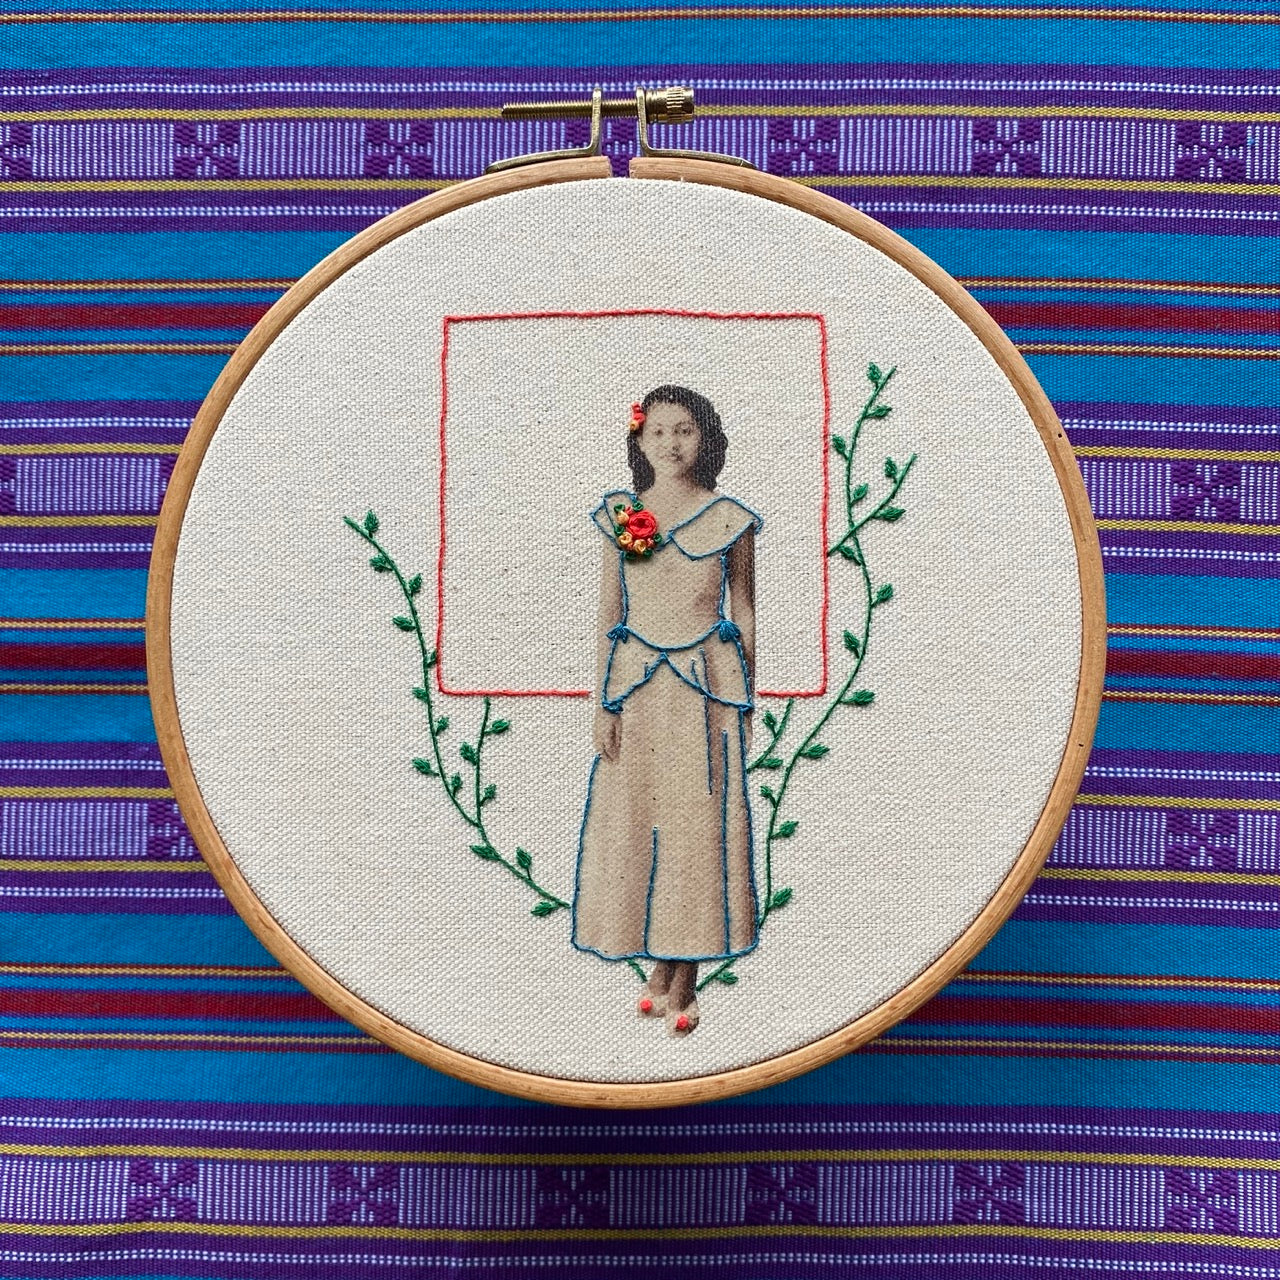 Photo Embroidery Workshop | Saturday, April 27, 1-4pm